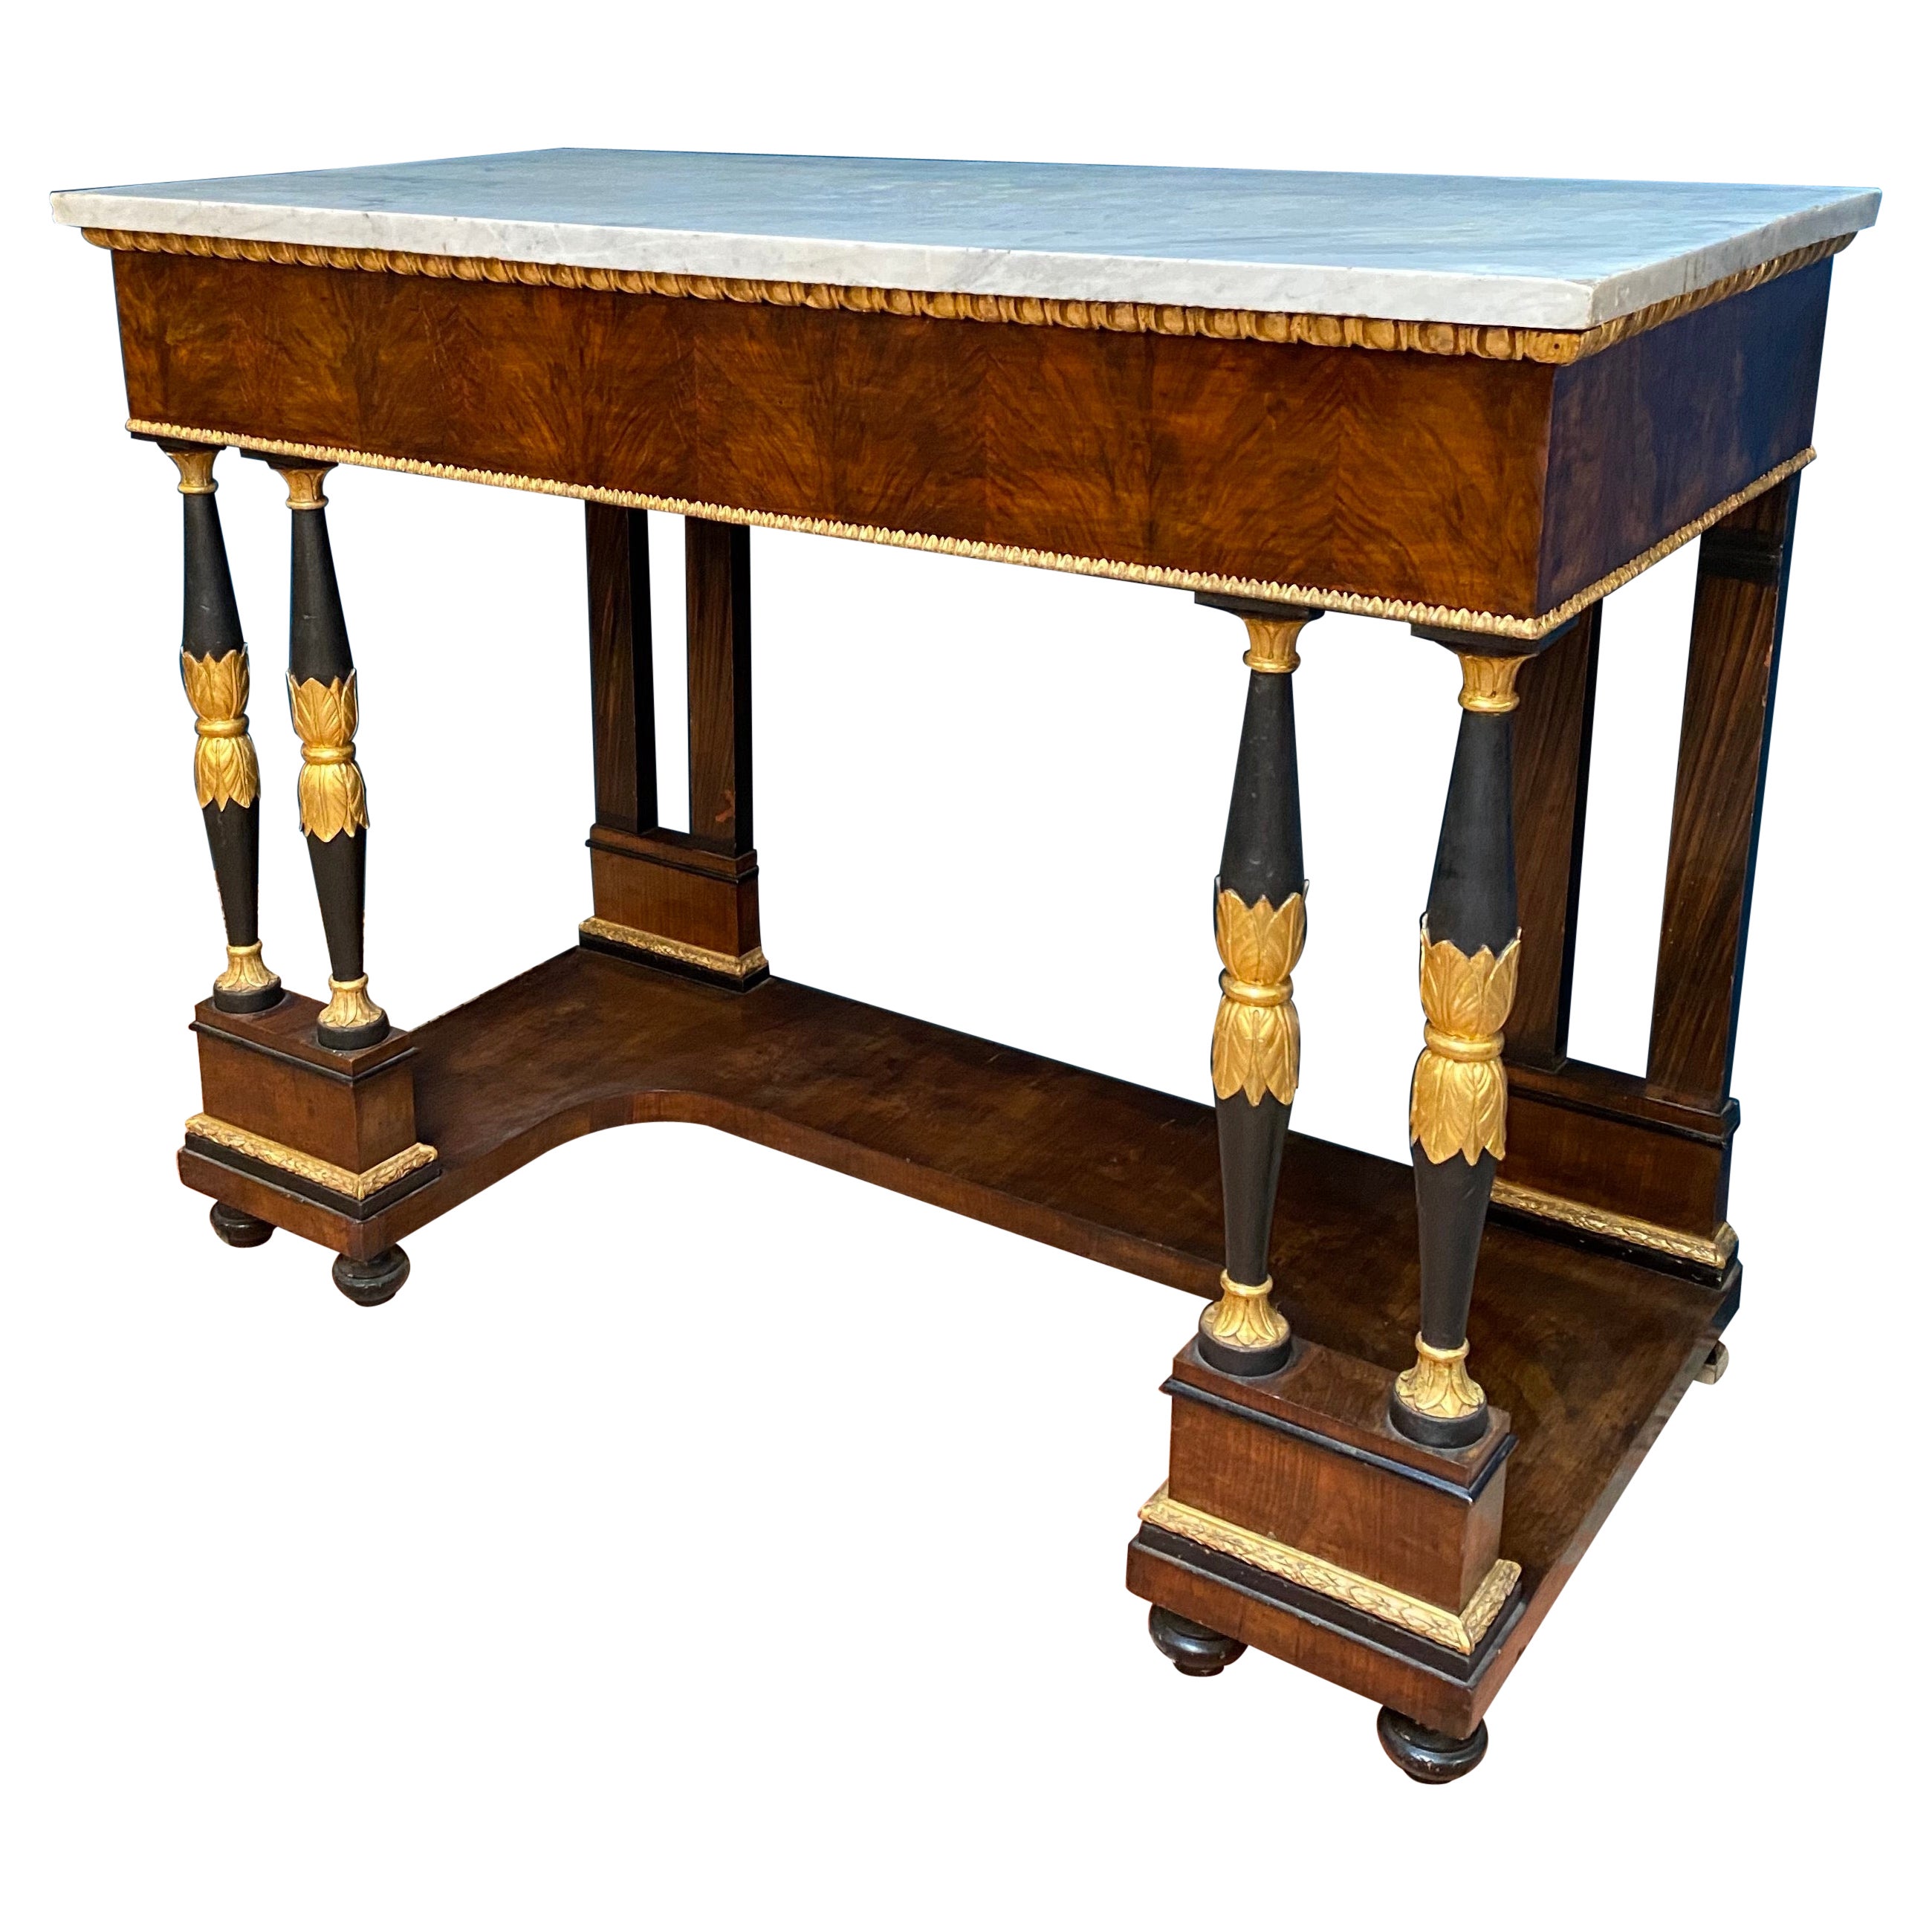 Elegant Italian Empire Consoles Tables with White Marble Top, 1815 For Sale